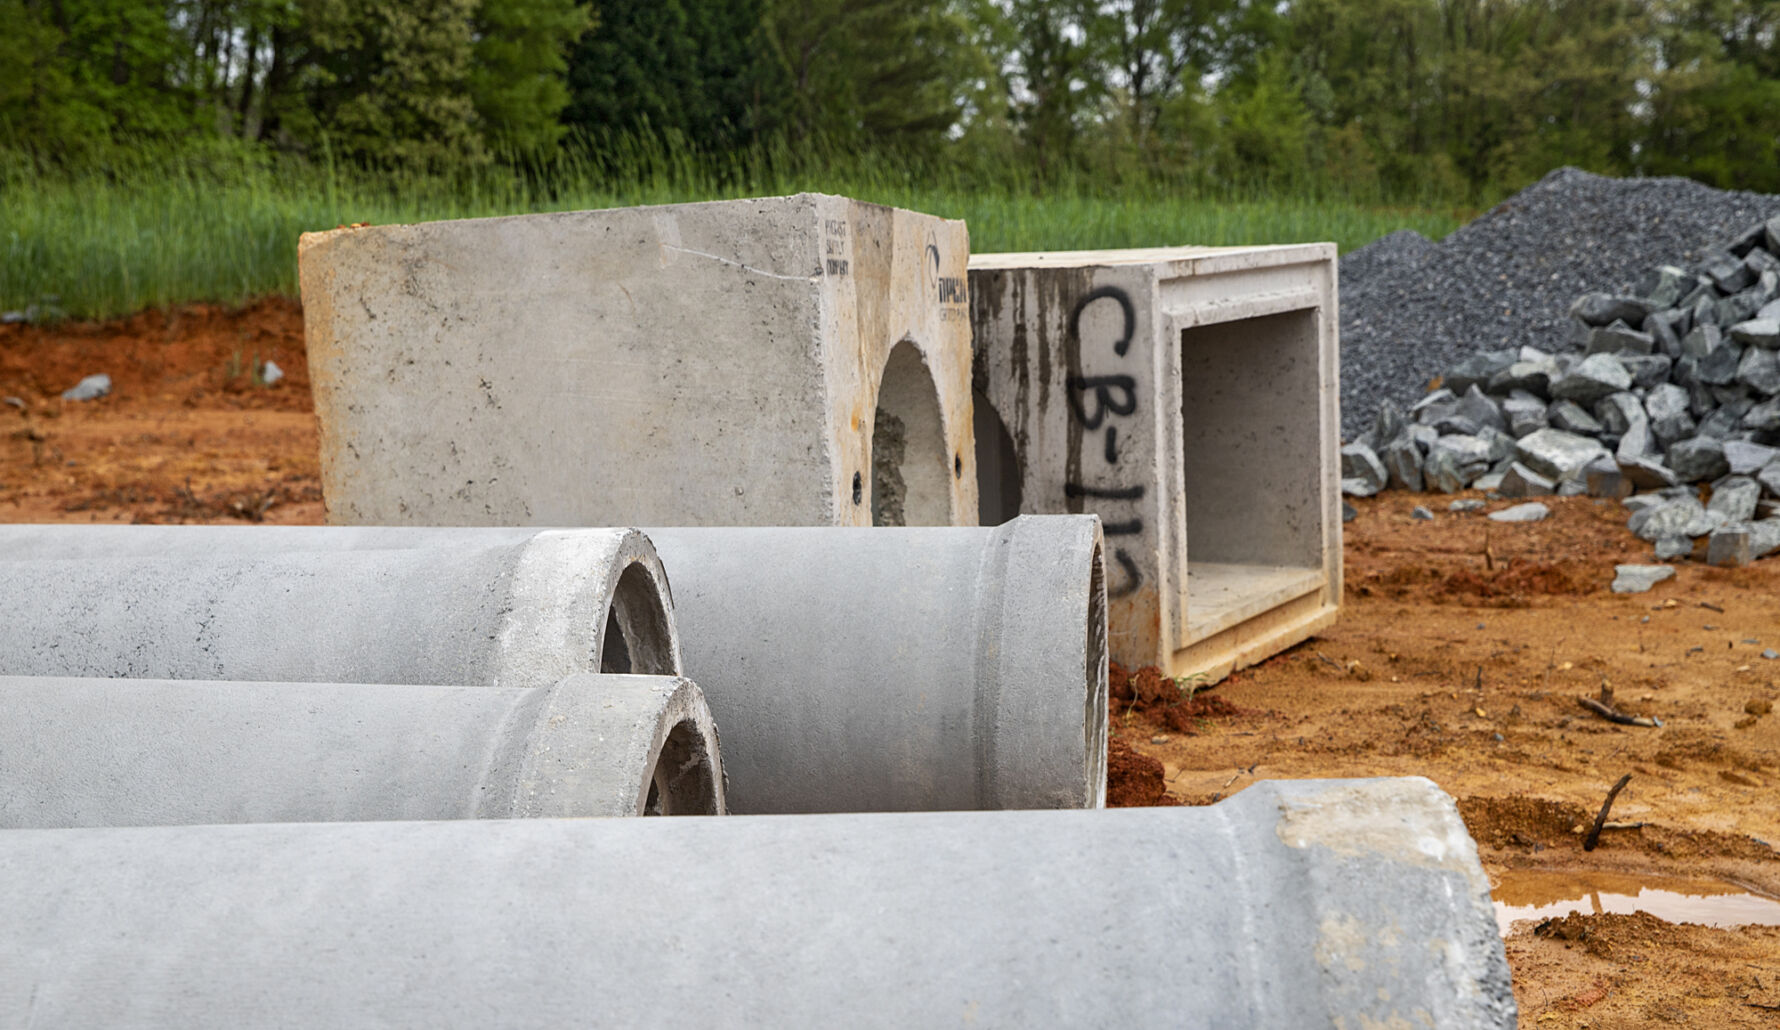 Johnson Concrete Products Reinforced Concrete Pipe and other drainage products